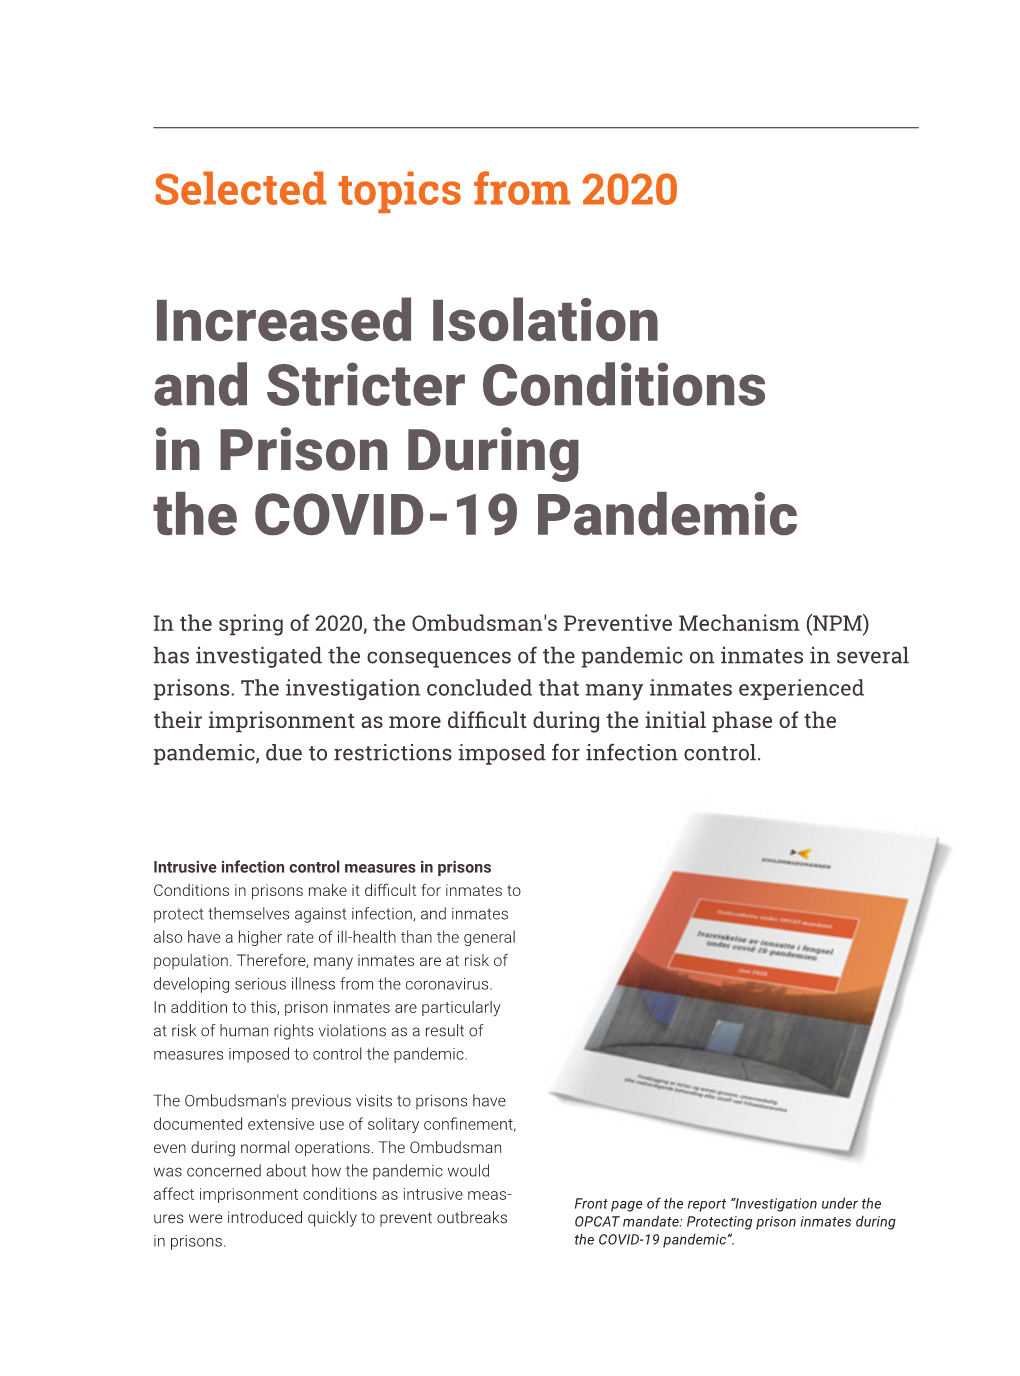 Increased Isolation and Stricter Conditions in Prison During the COVID-19 Pandemic